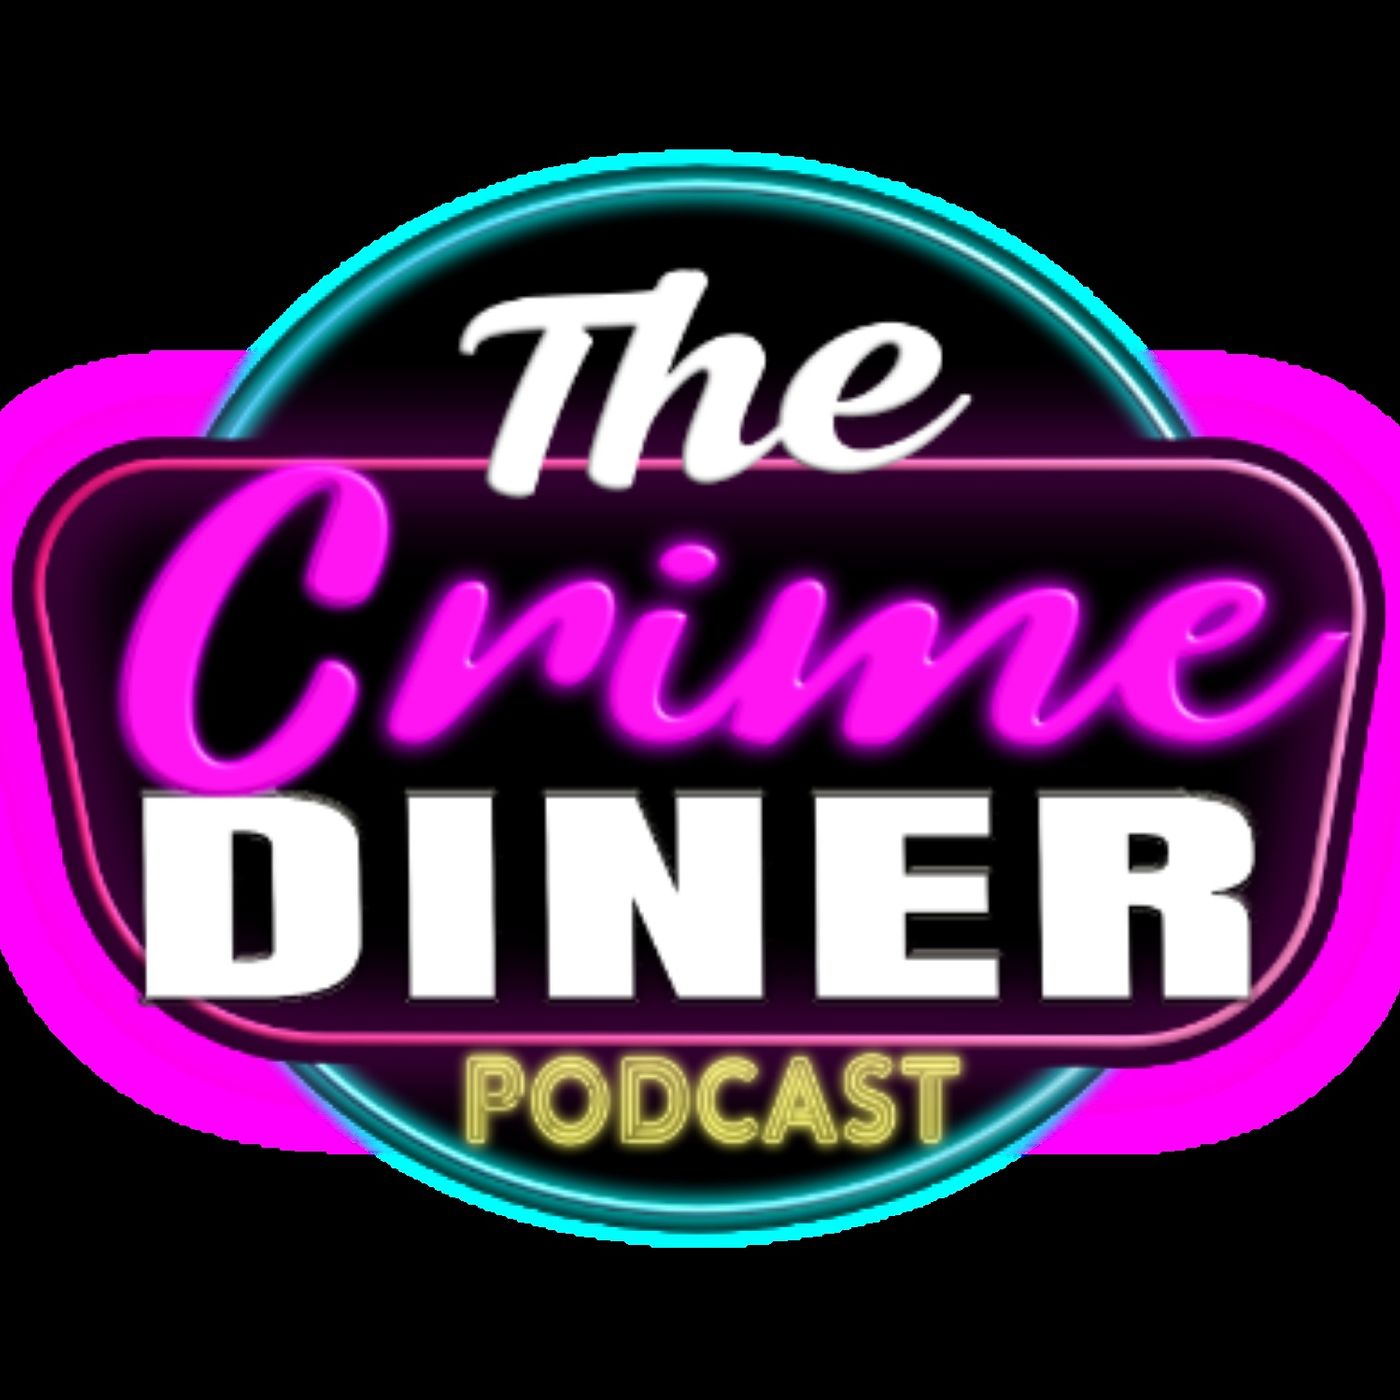 Crime Diner: Witch Please